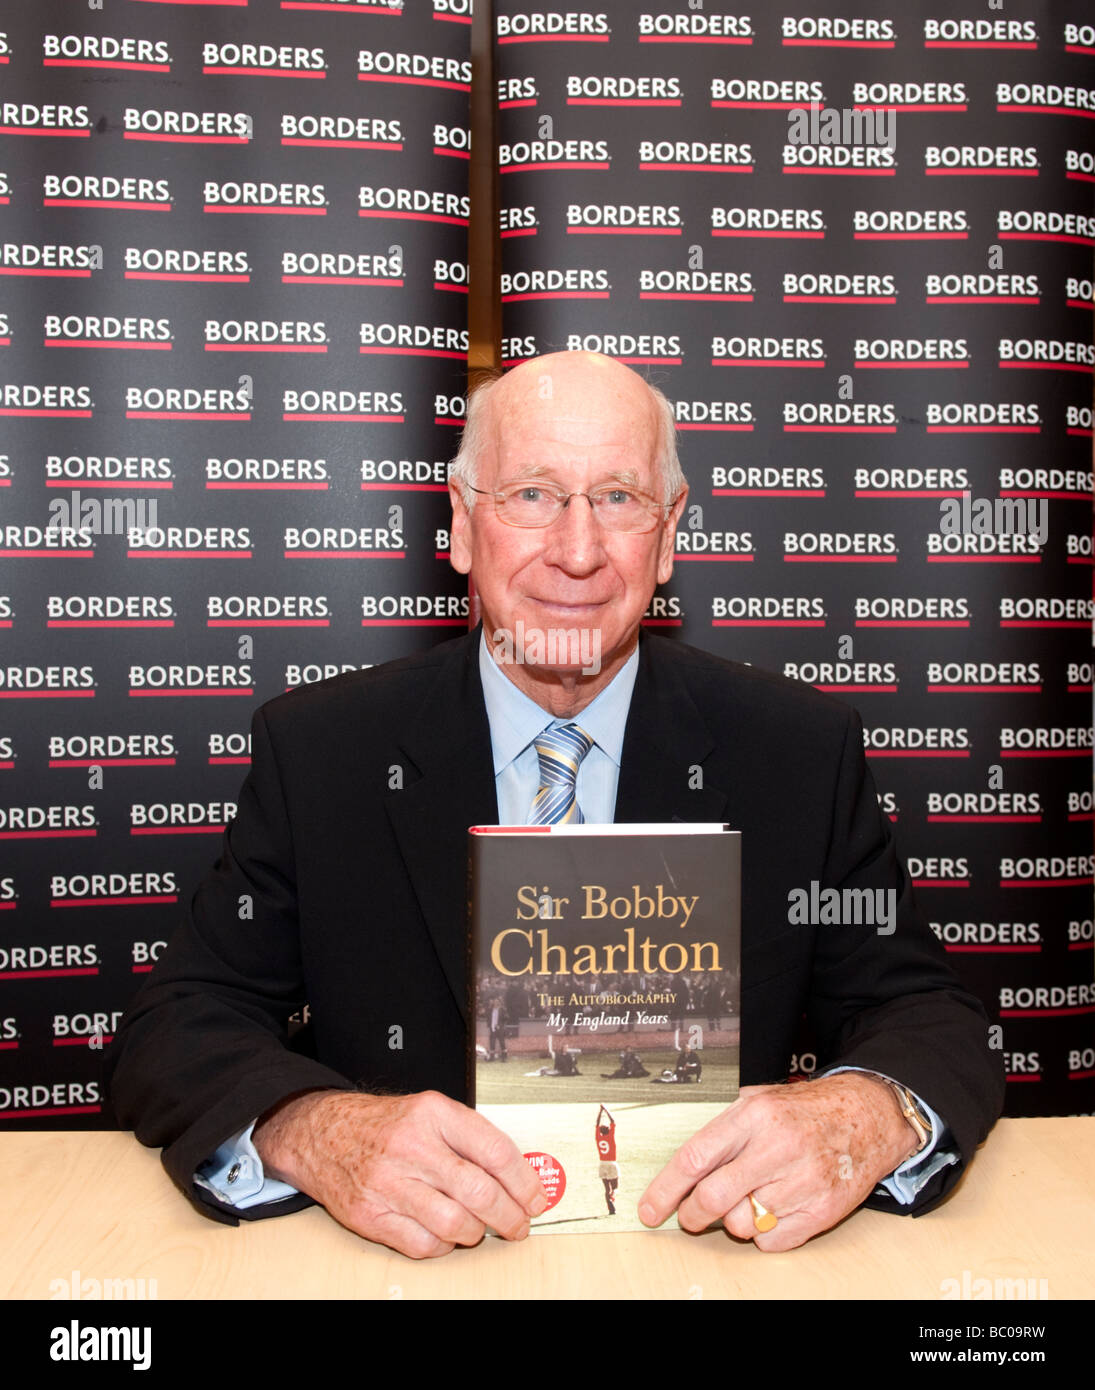 England and Manchester United footballing legend Sir Bobby Charlton at